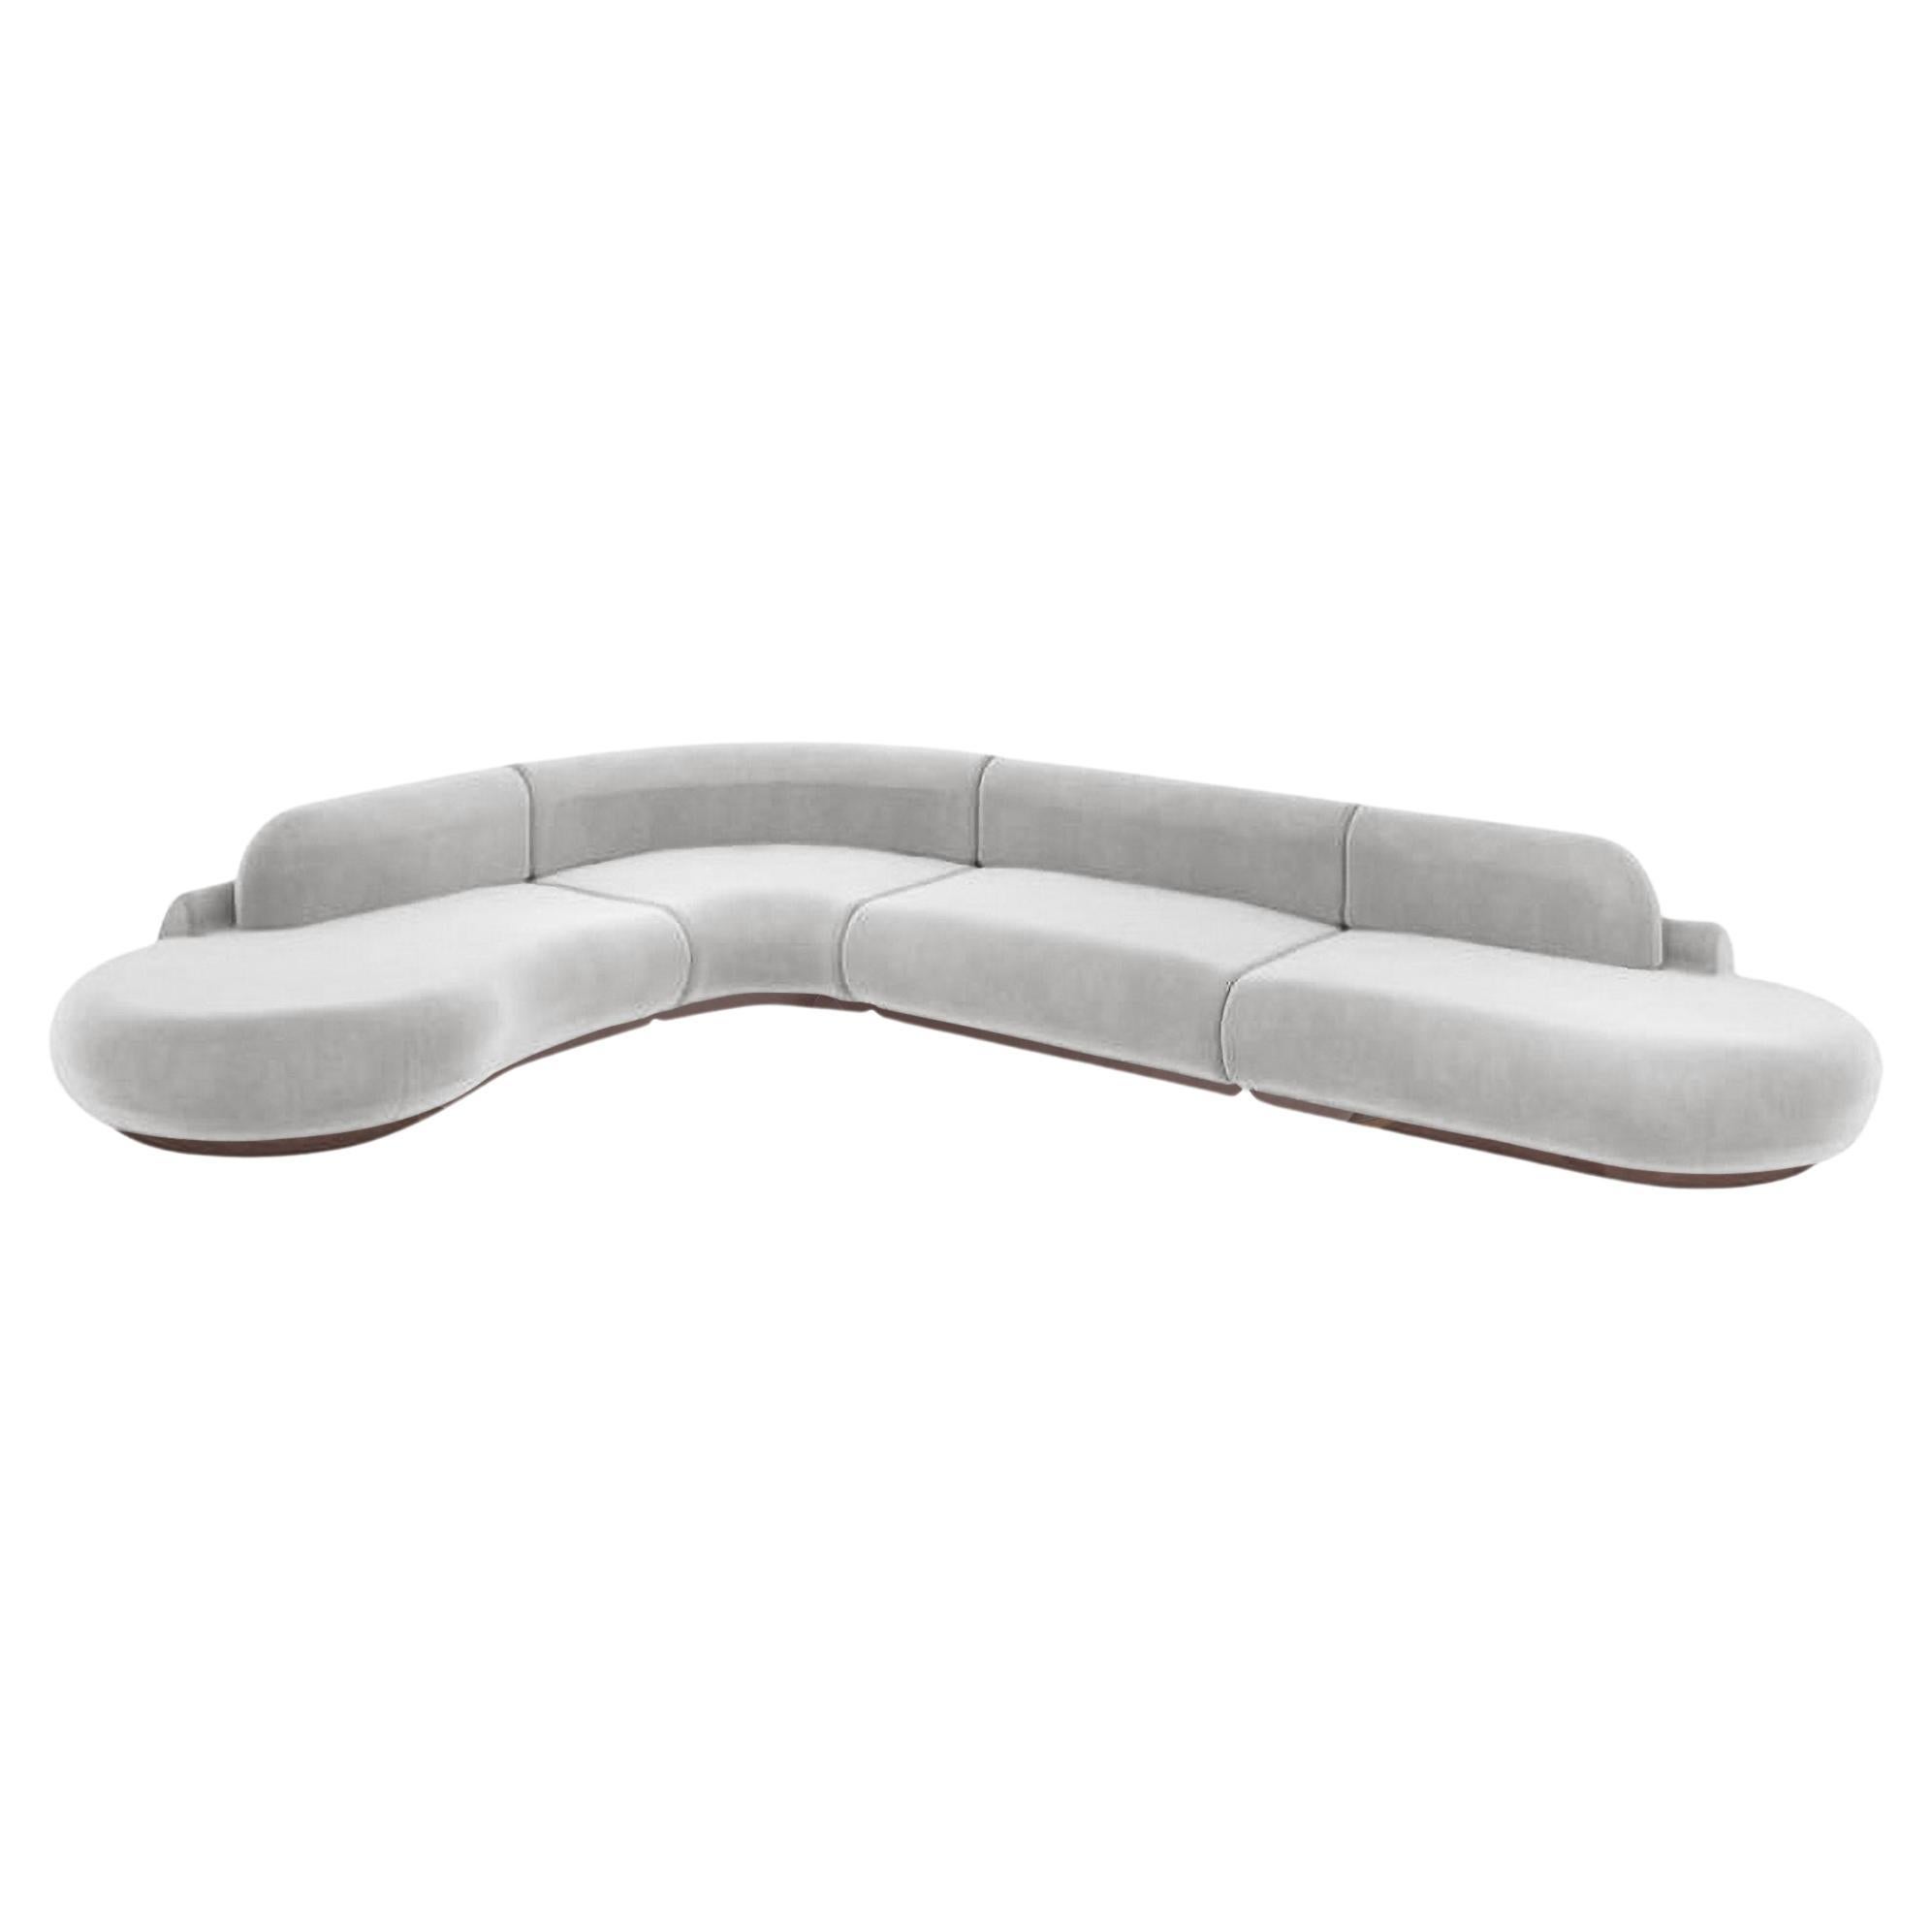 Naked Sectional Sofa, 4 Piece with Beech Ash-056-1 and Aluminium